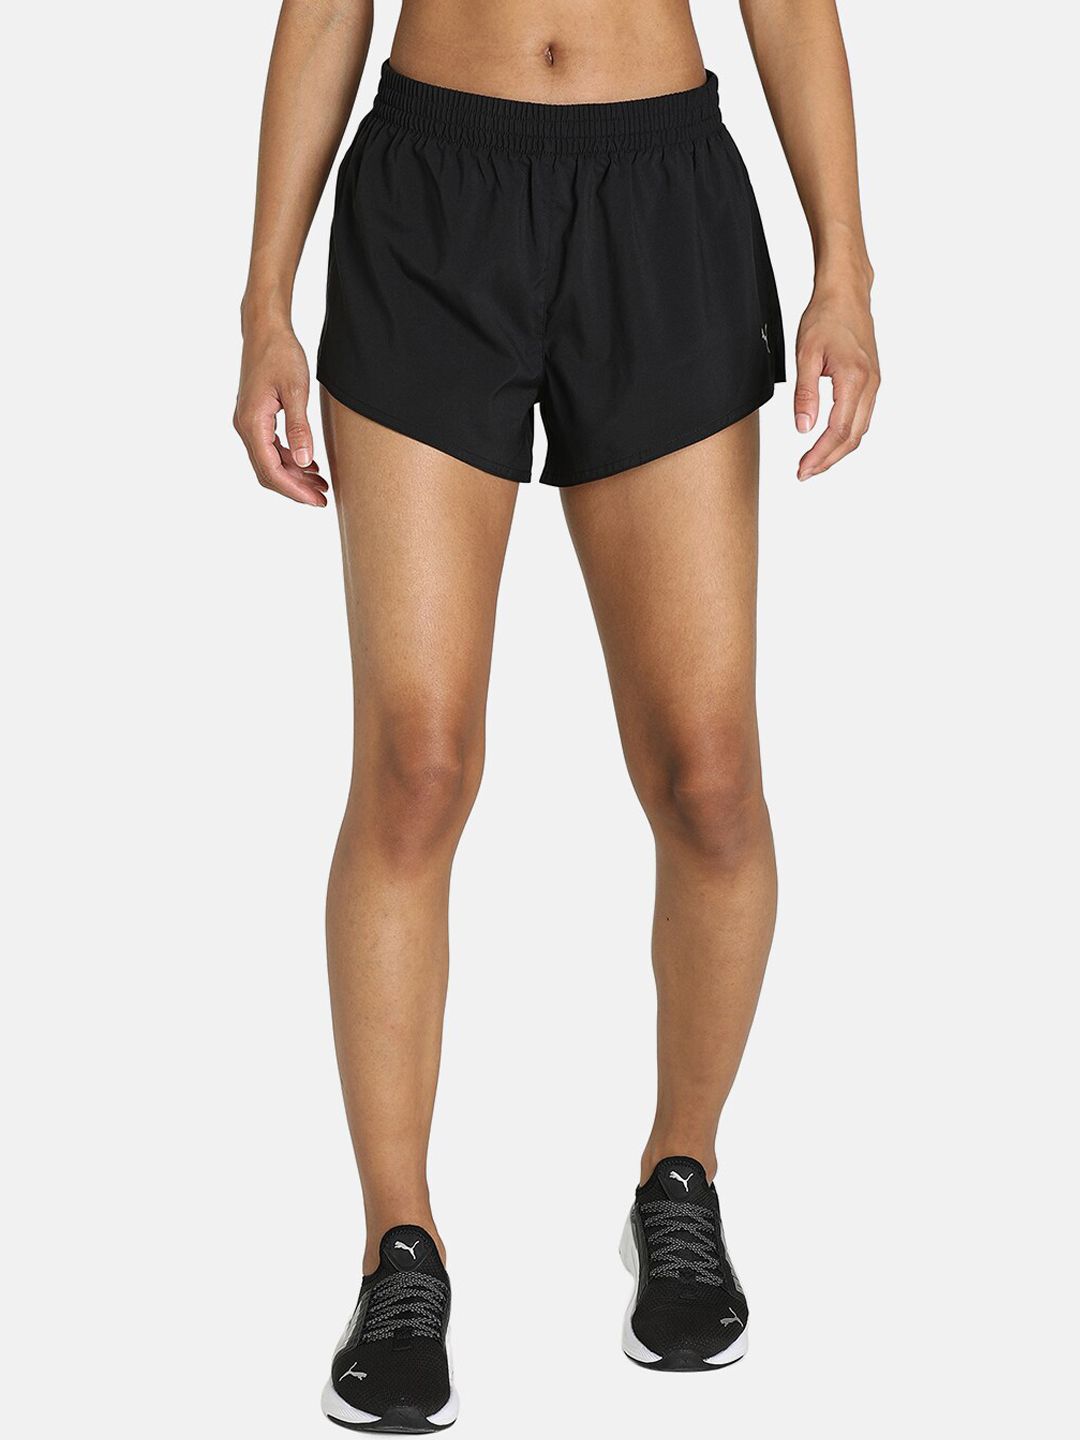 Puma Women Black Slim Fit dryCELL Technology Running Sports Shorts Price in India